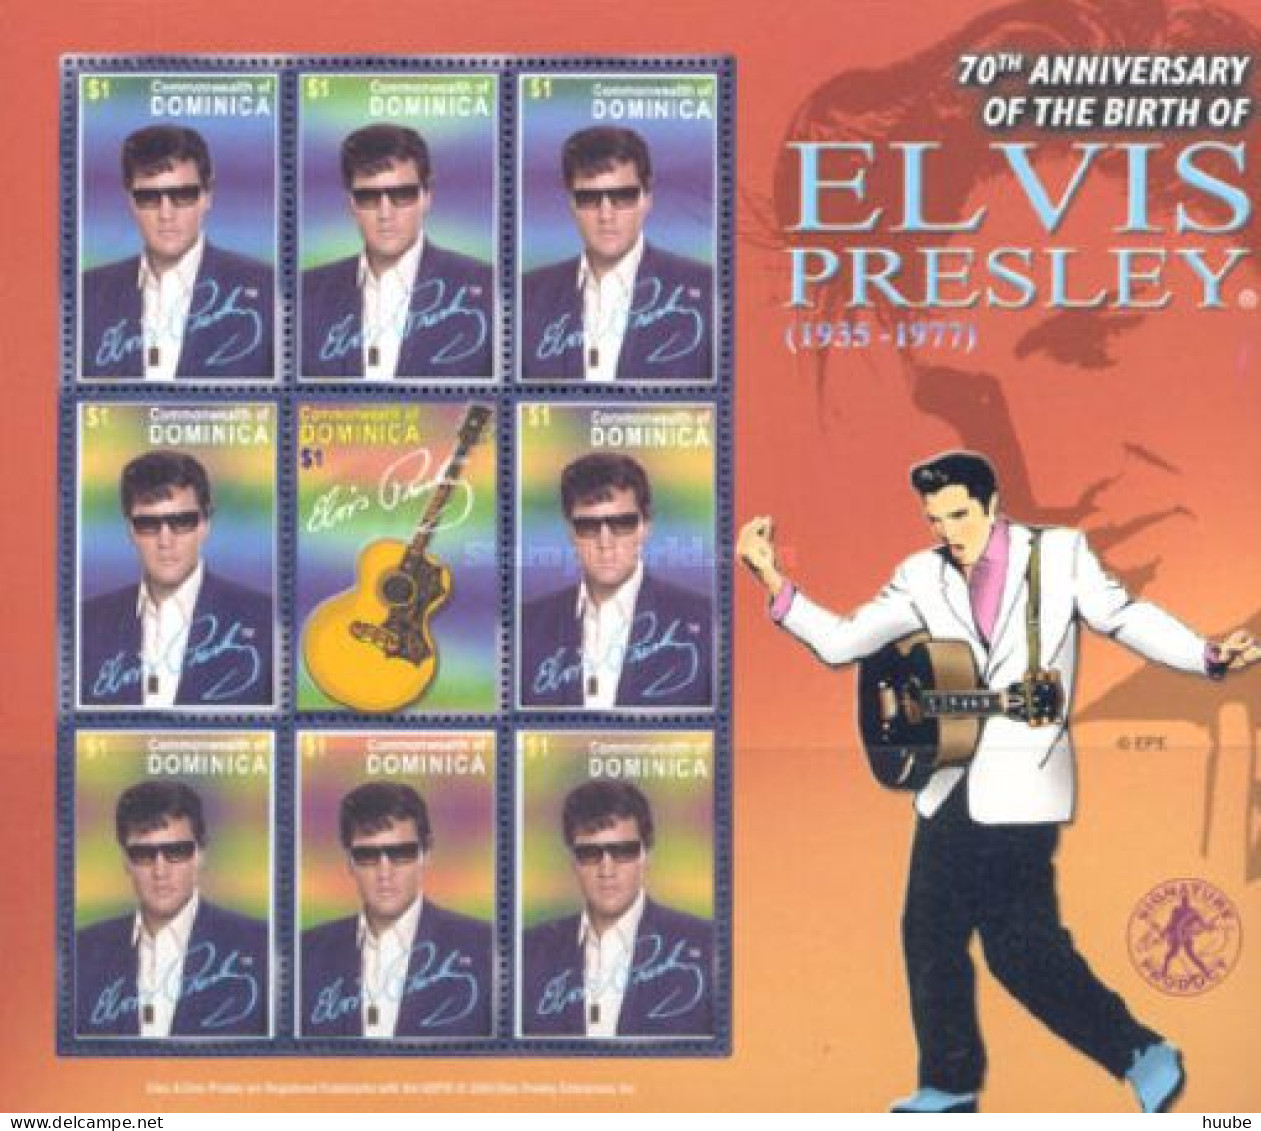 Dominica, 2005, Mi 3666-3669, 70th Anniversary Of The Birth Of Elvis Presley,  2 Sheets Of 6, MNH - Elvis Presley